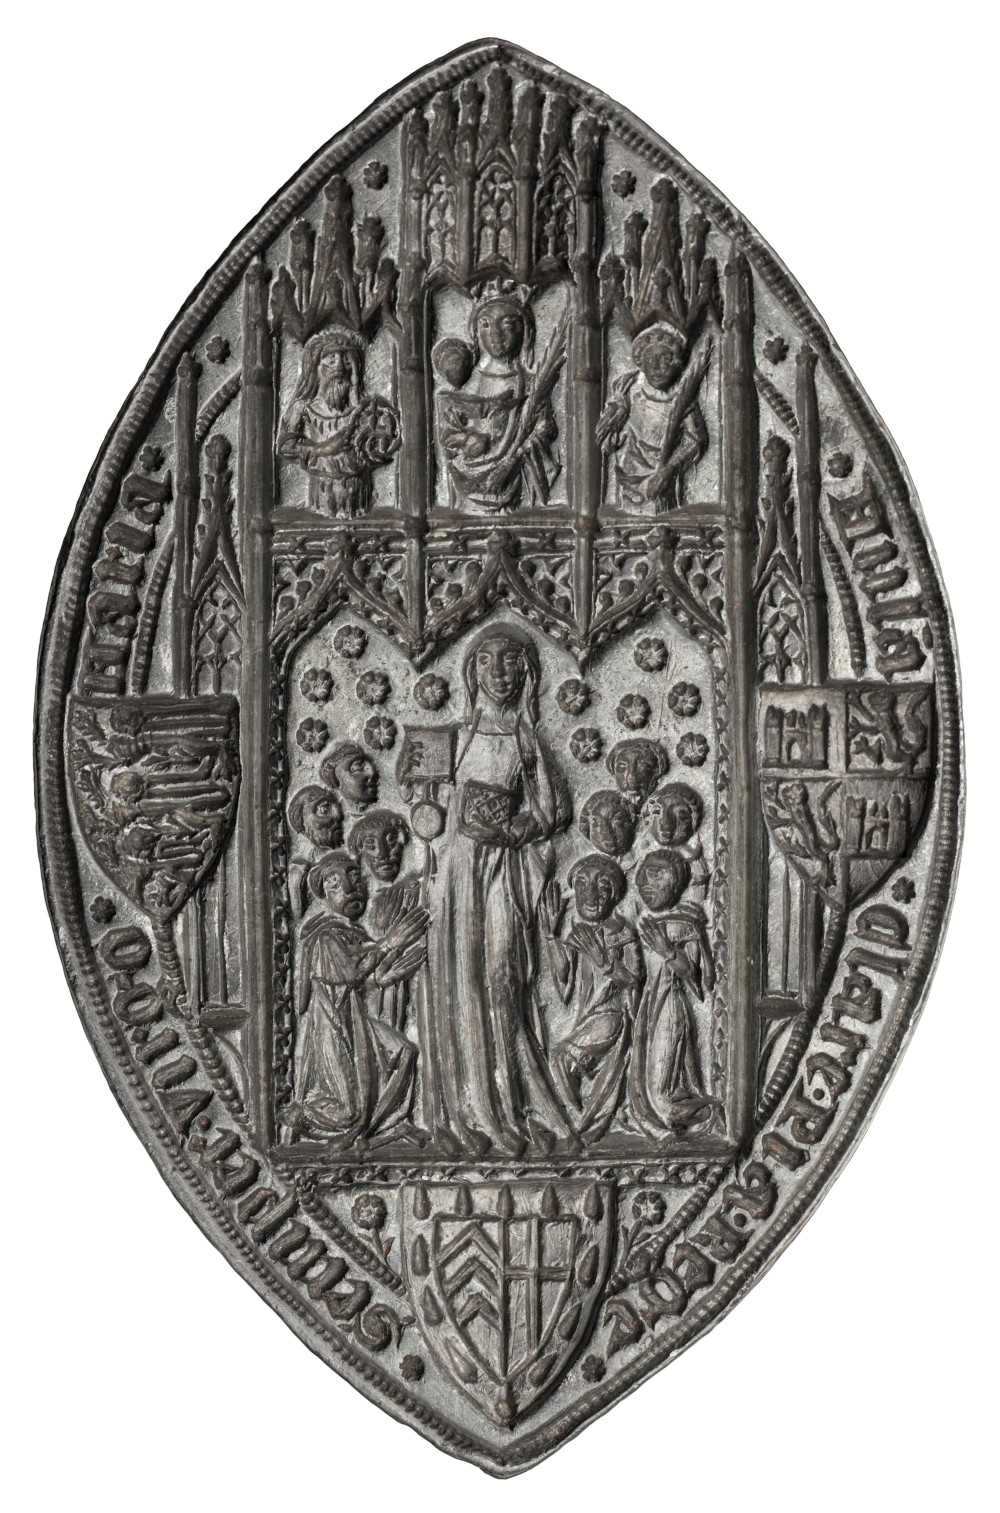 The silver matrix, a pointed oval with intricate design described below, the photo flipped so that the inscription reads correctly